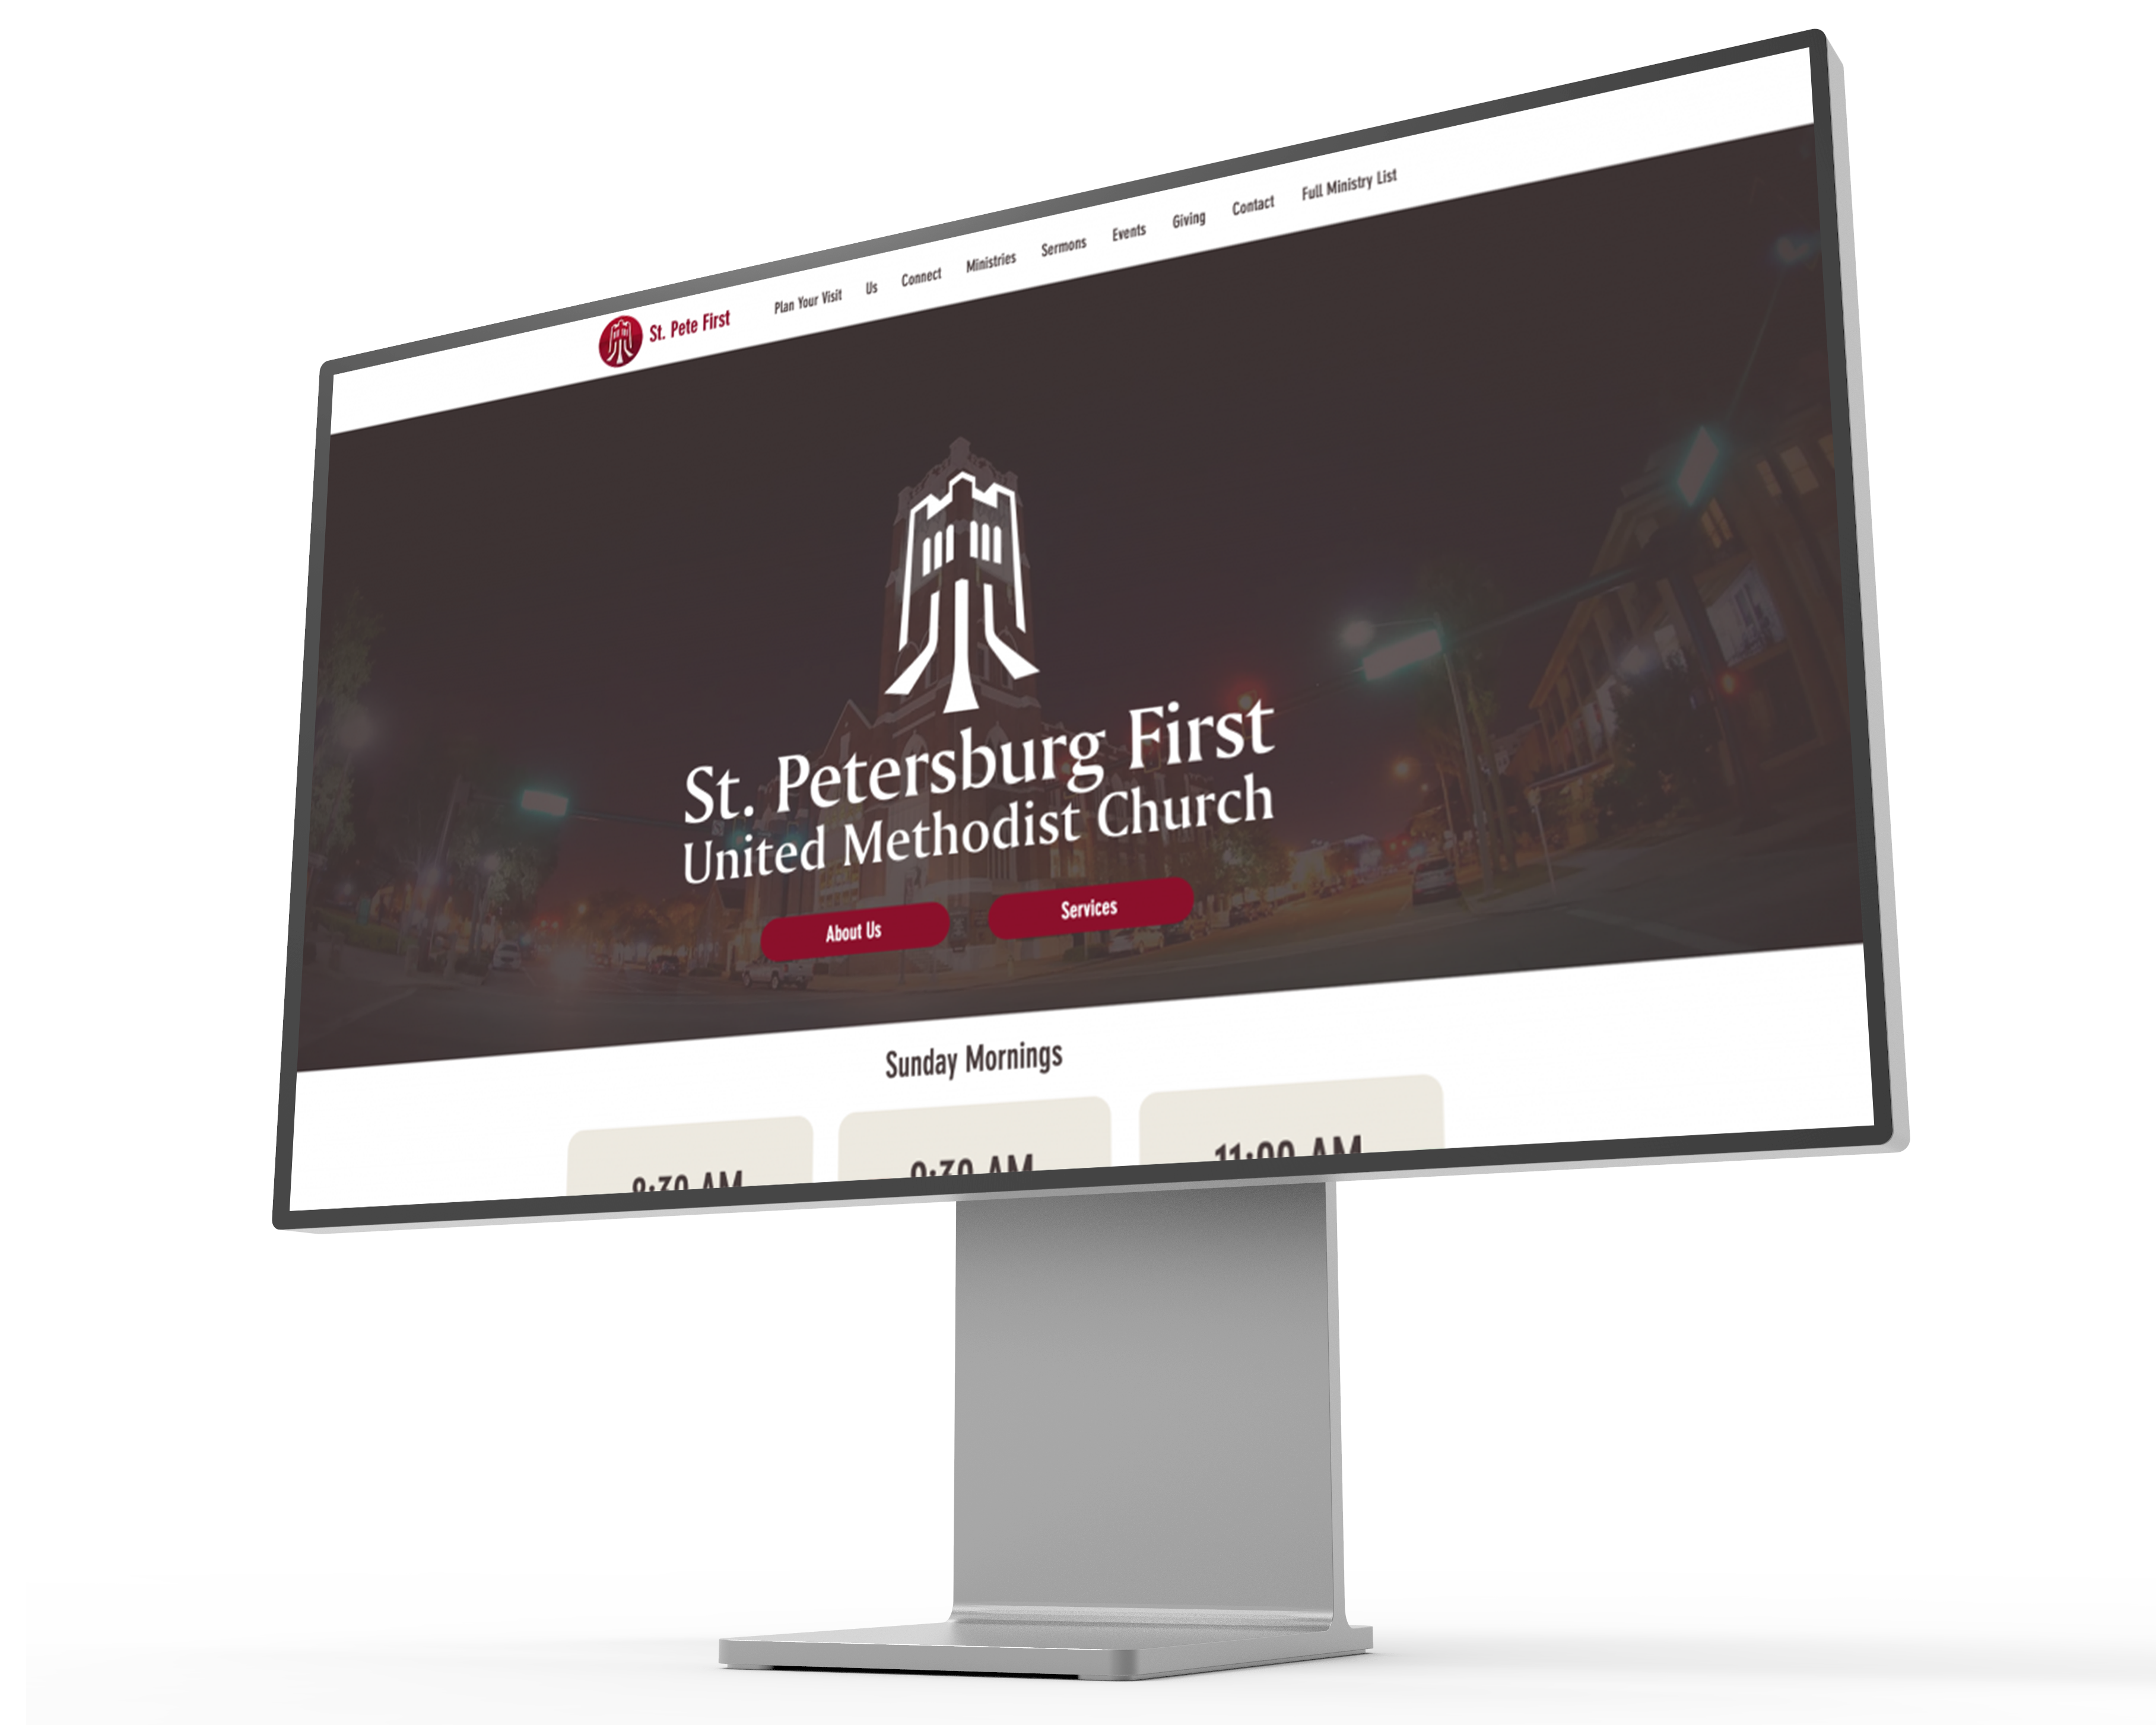 Image of the St. Petersburg First United Methodist Church website displayed on a mockup of a Pro XDR Display. 